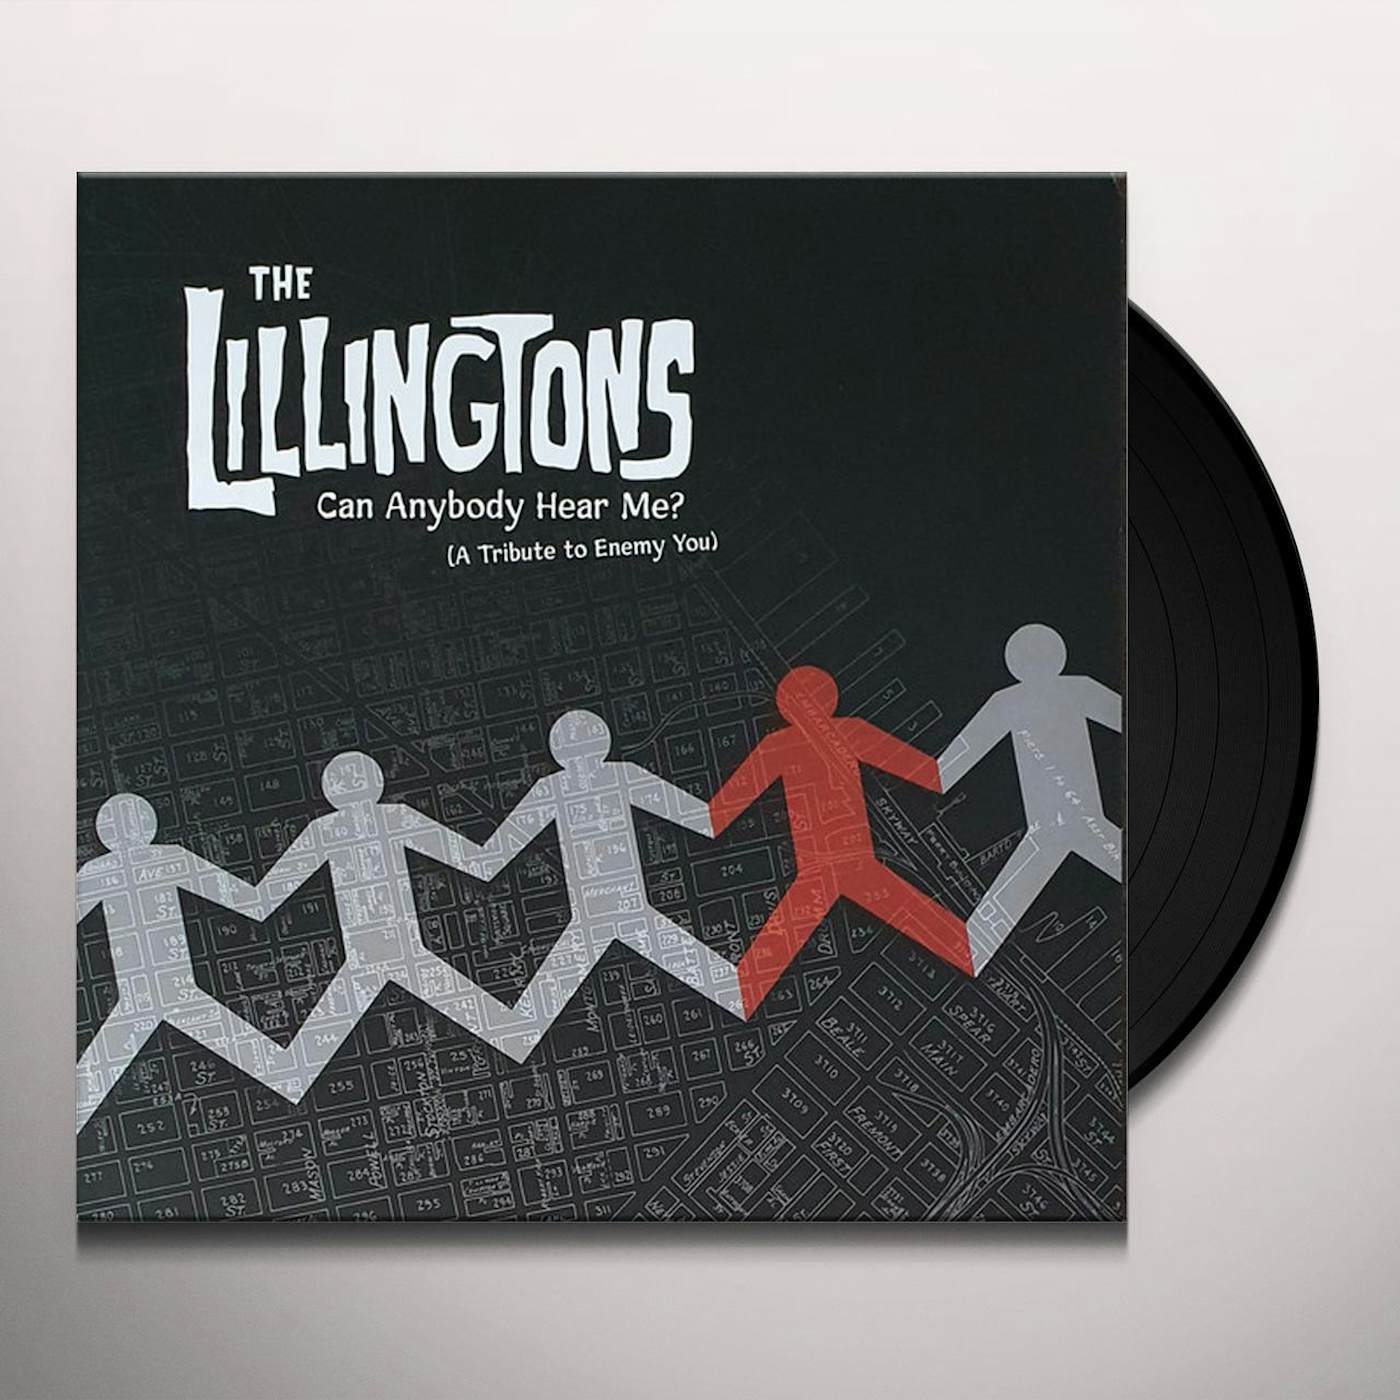 The Lillingtons CAN ANYBODY HEAR ME (A TRIBUTE TO ENEMY YOU) Vinyl Record